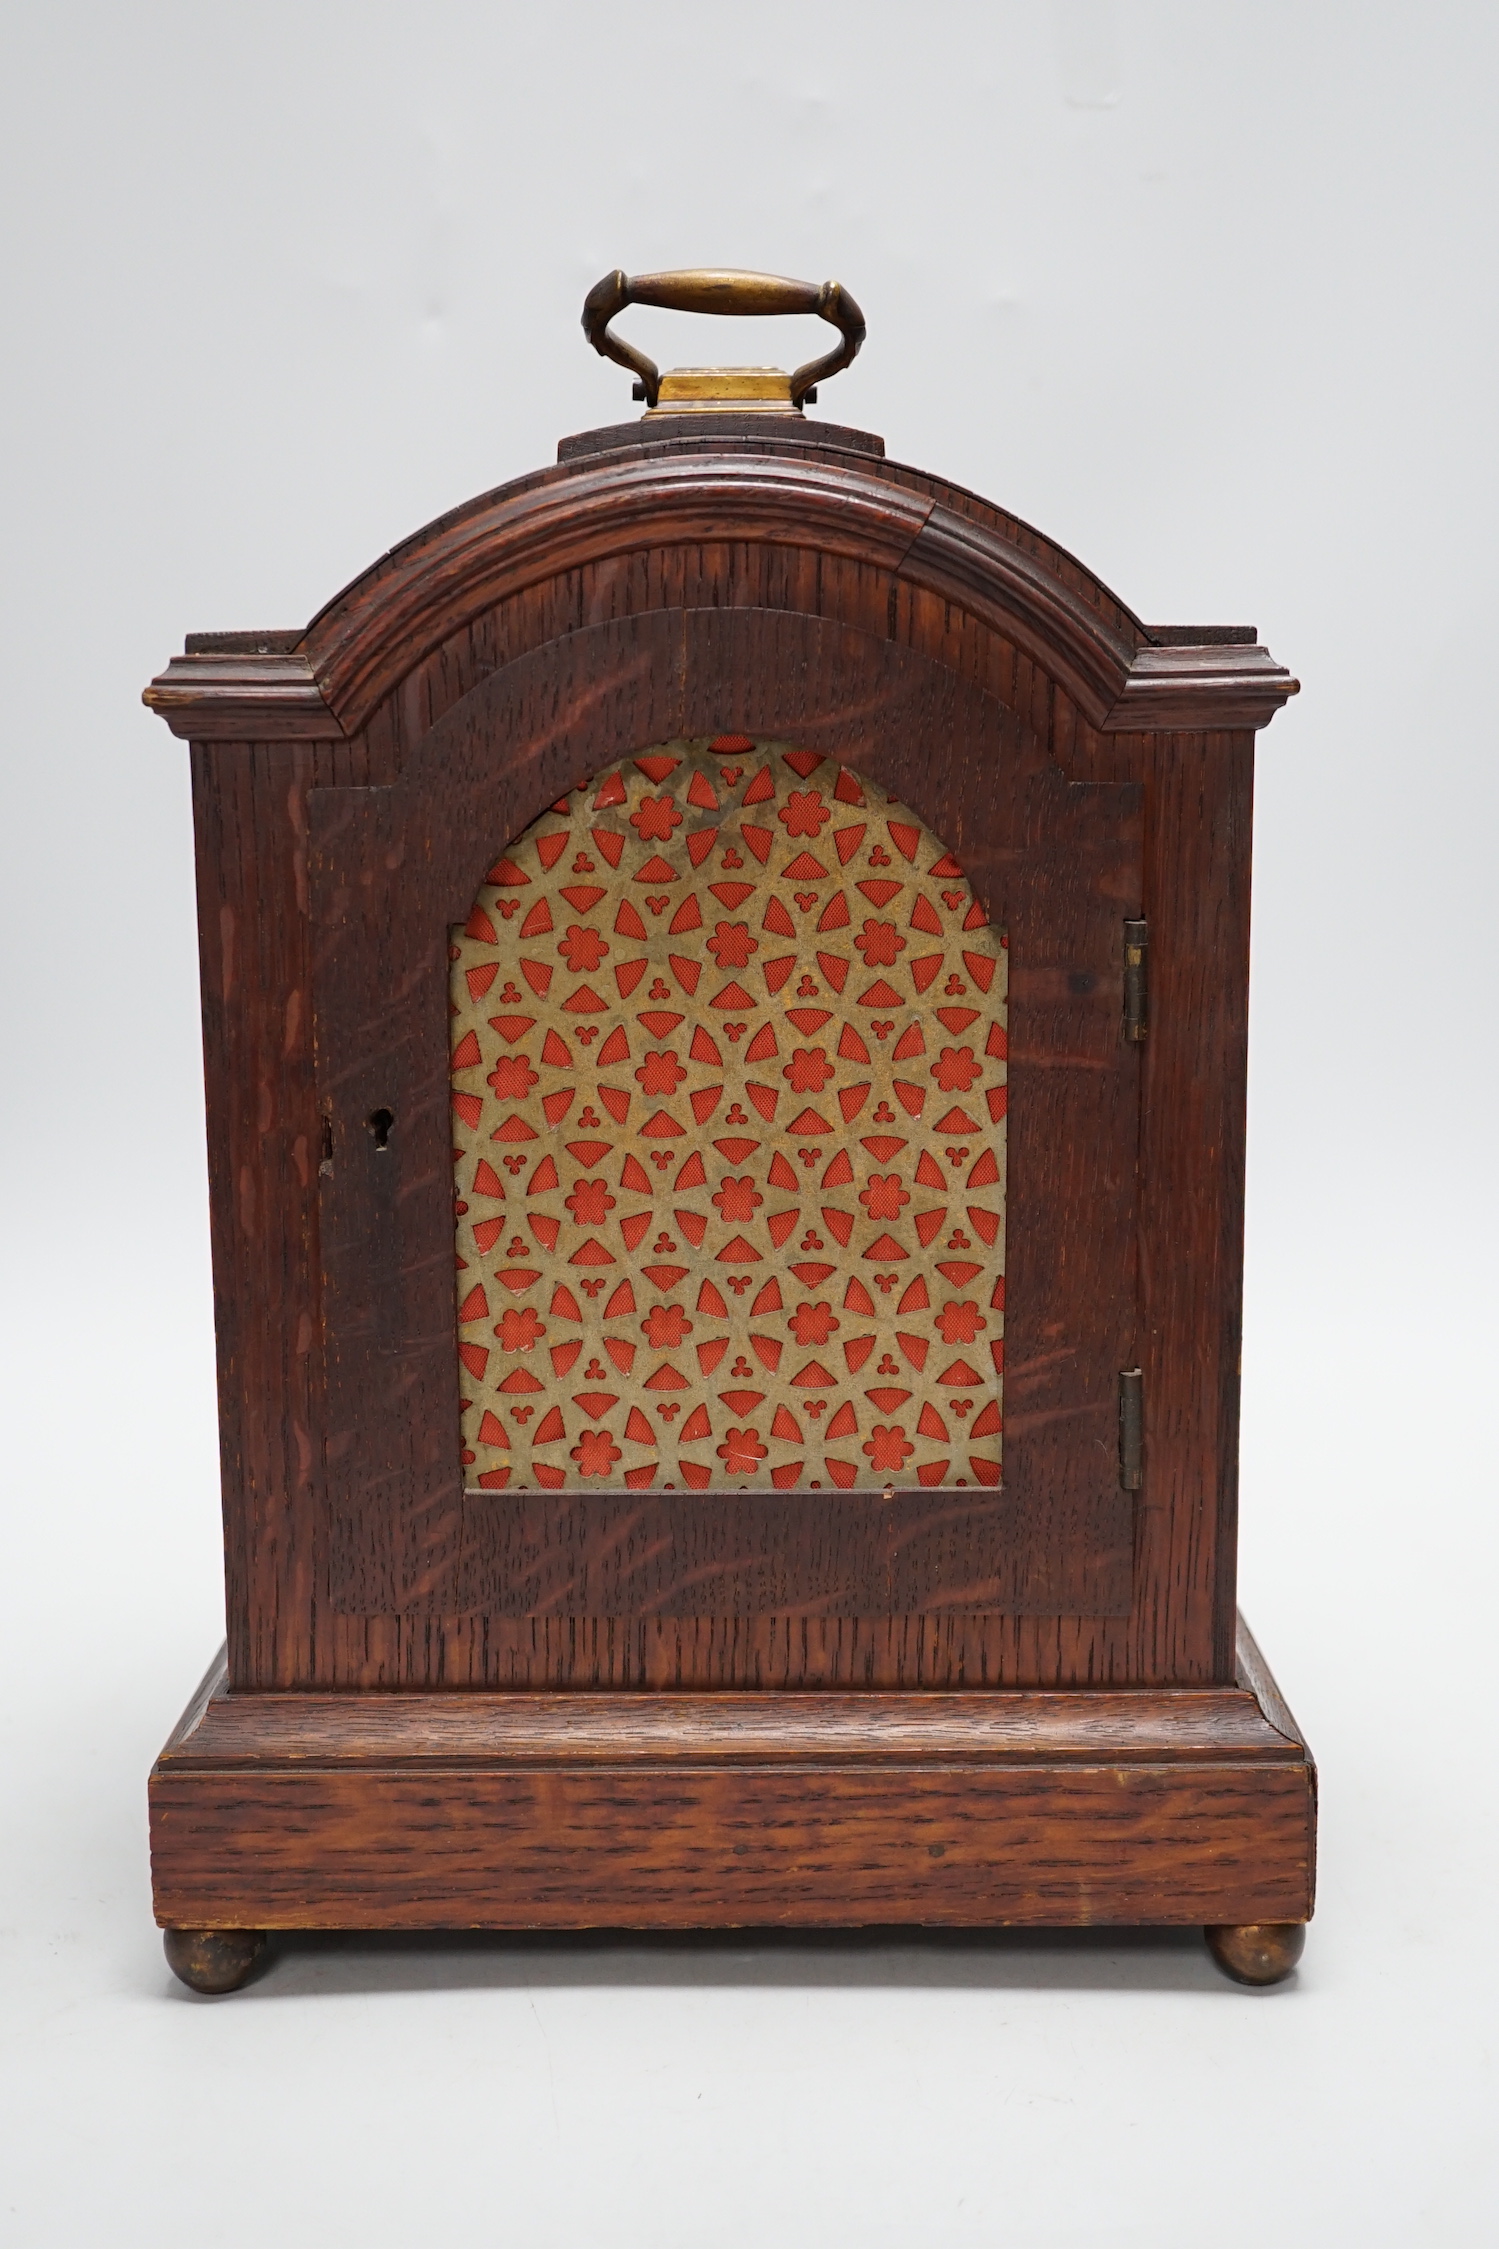 A oak mantel clock in a Regency style with pad top, striking on a coiled gong, 30cm high - Image 3 of 4